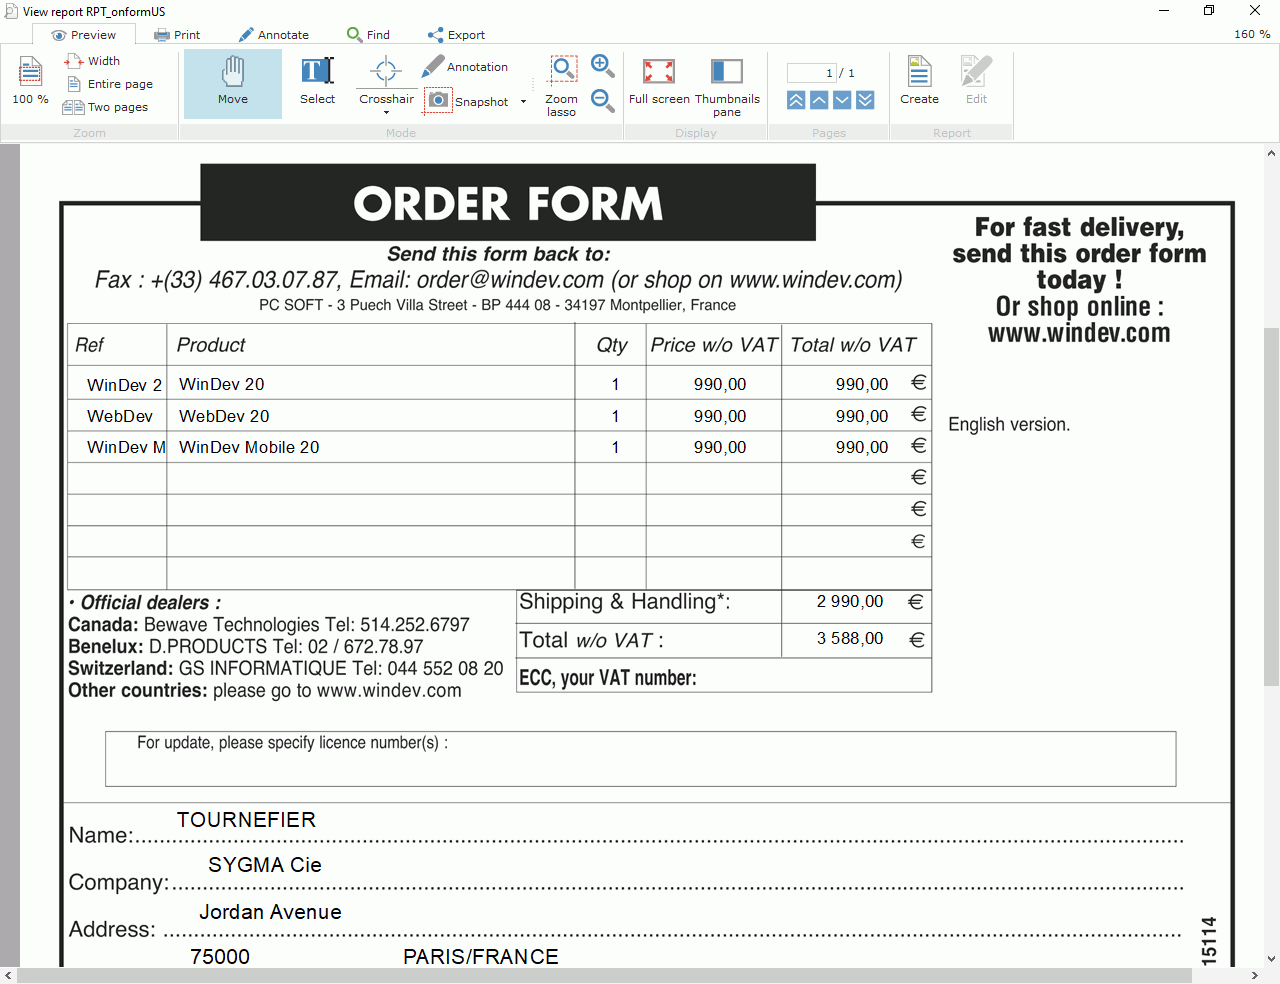 Report based on a form